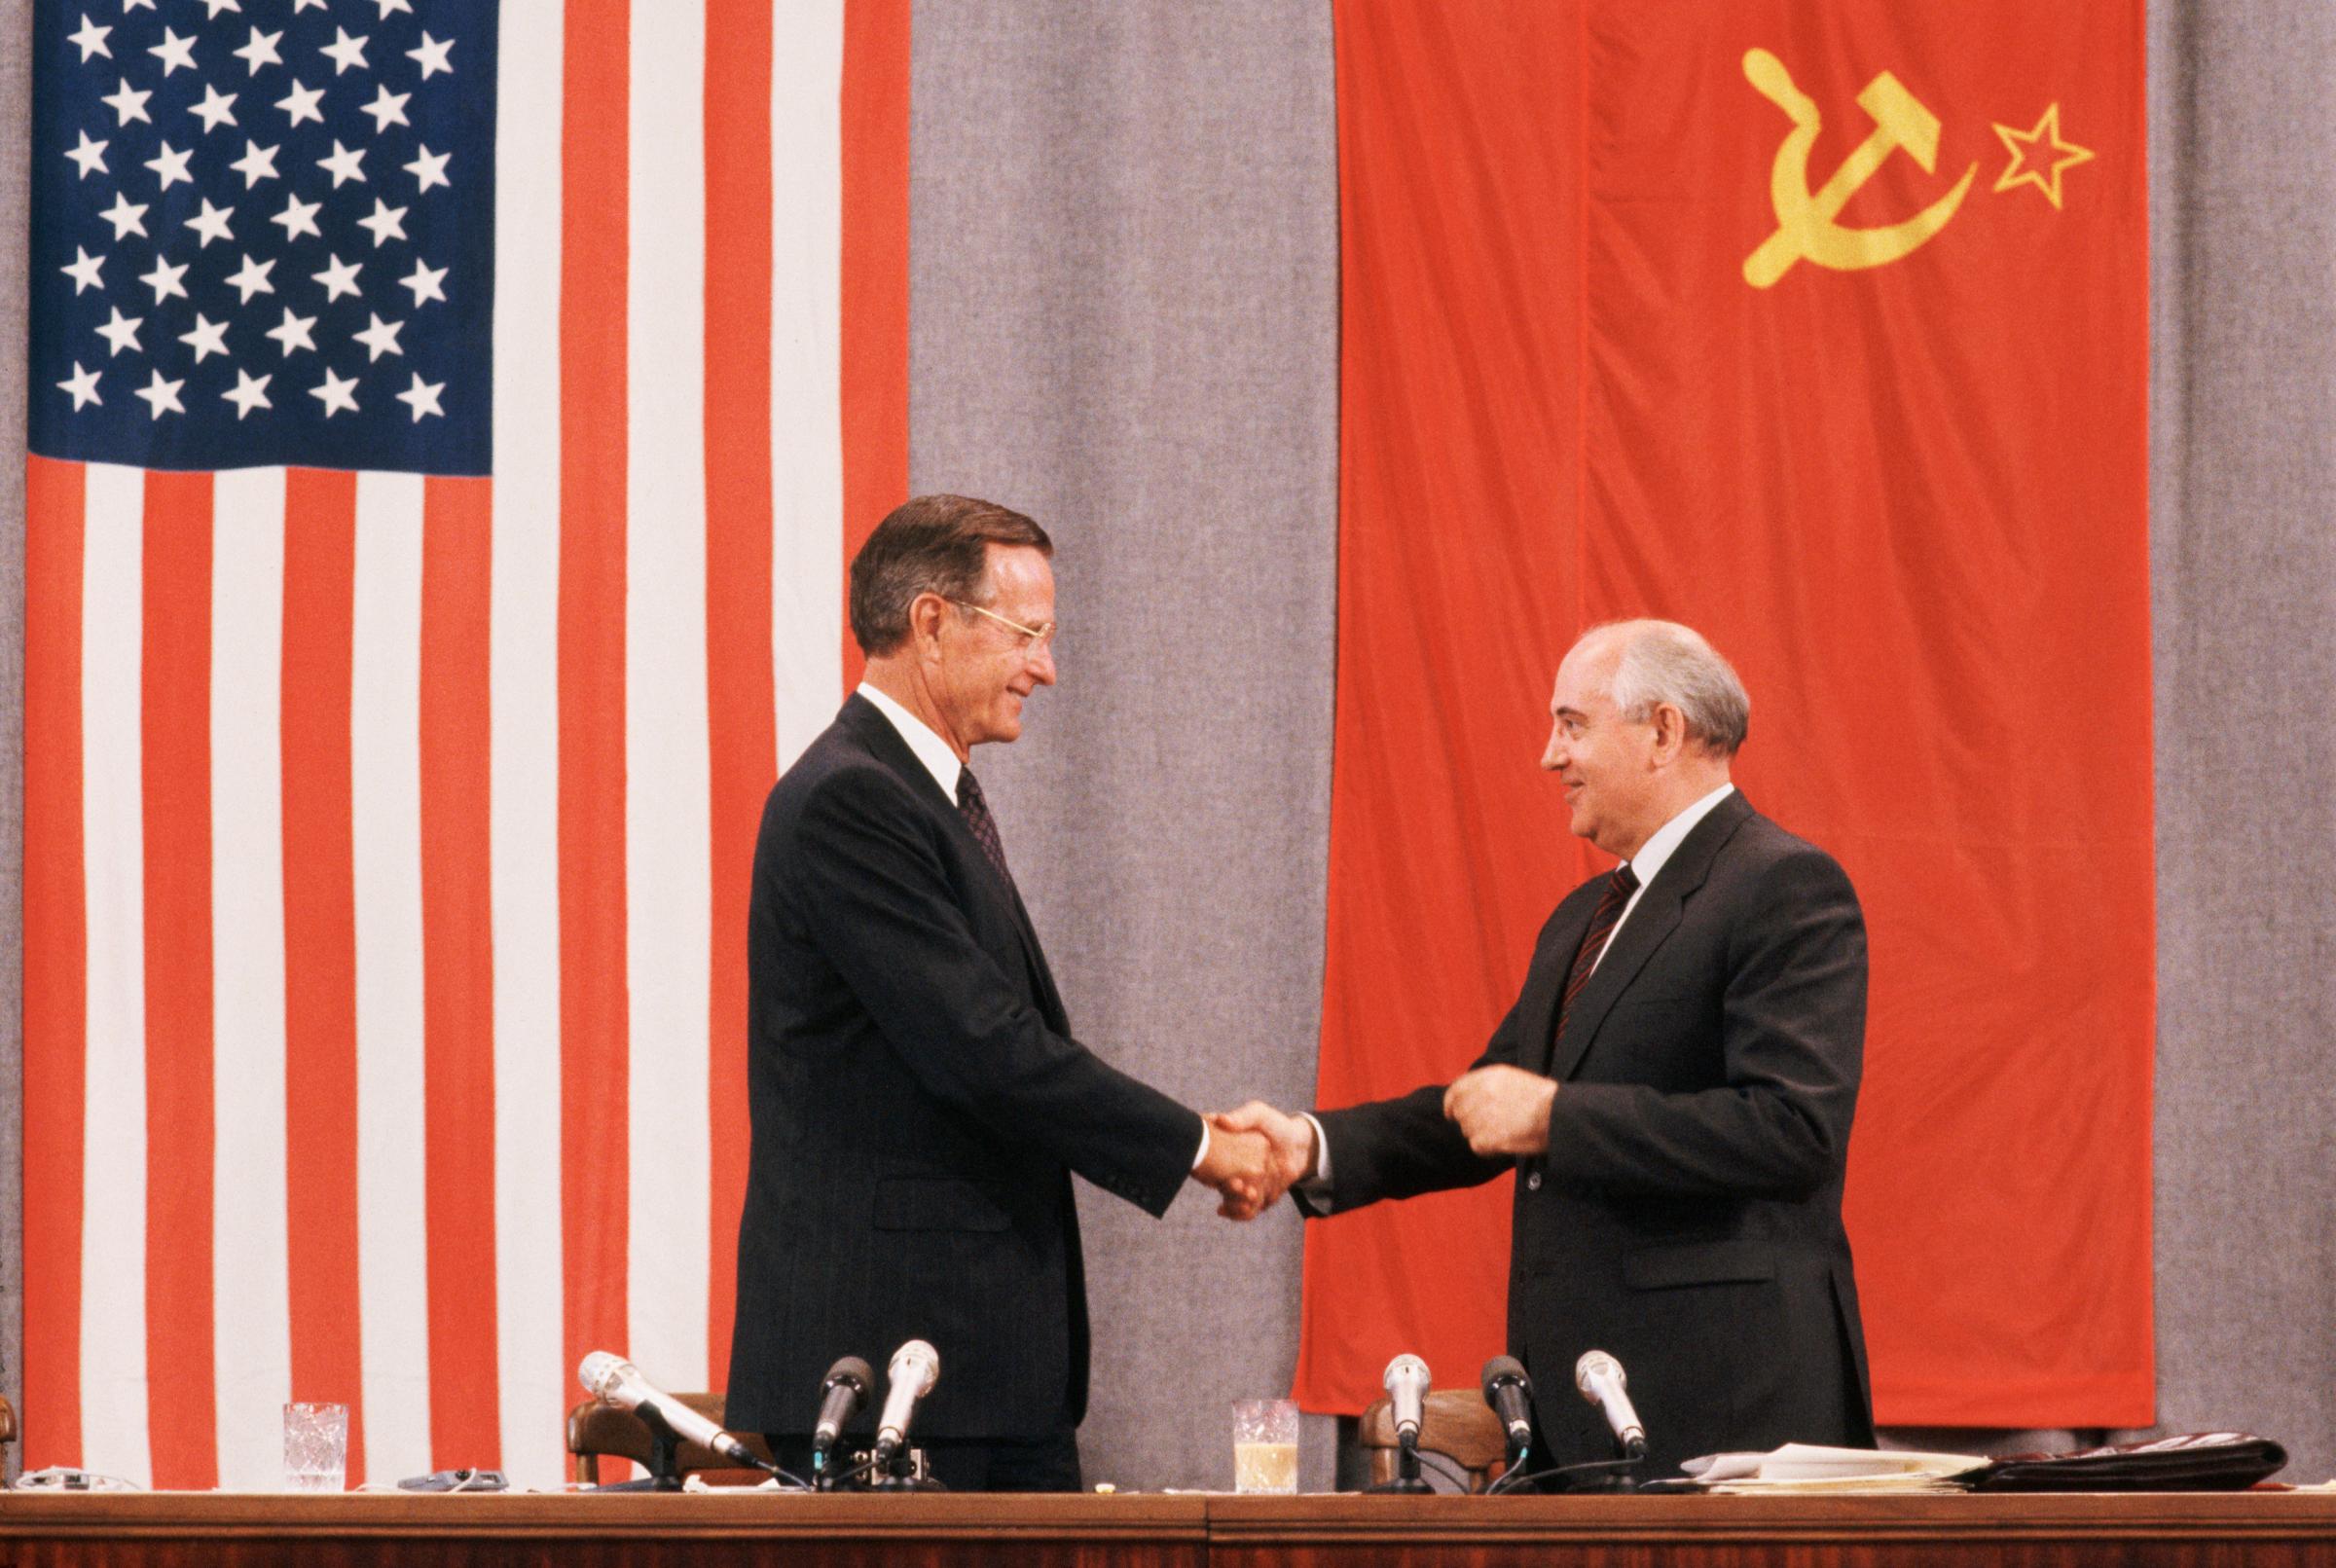 Presidents George H.W. Bush and Mikhail Gorbachev shake hands at the end of a press conference about the peace summit in Moscow on July 31, 1991.